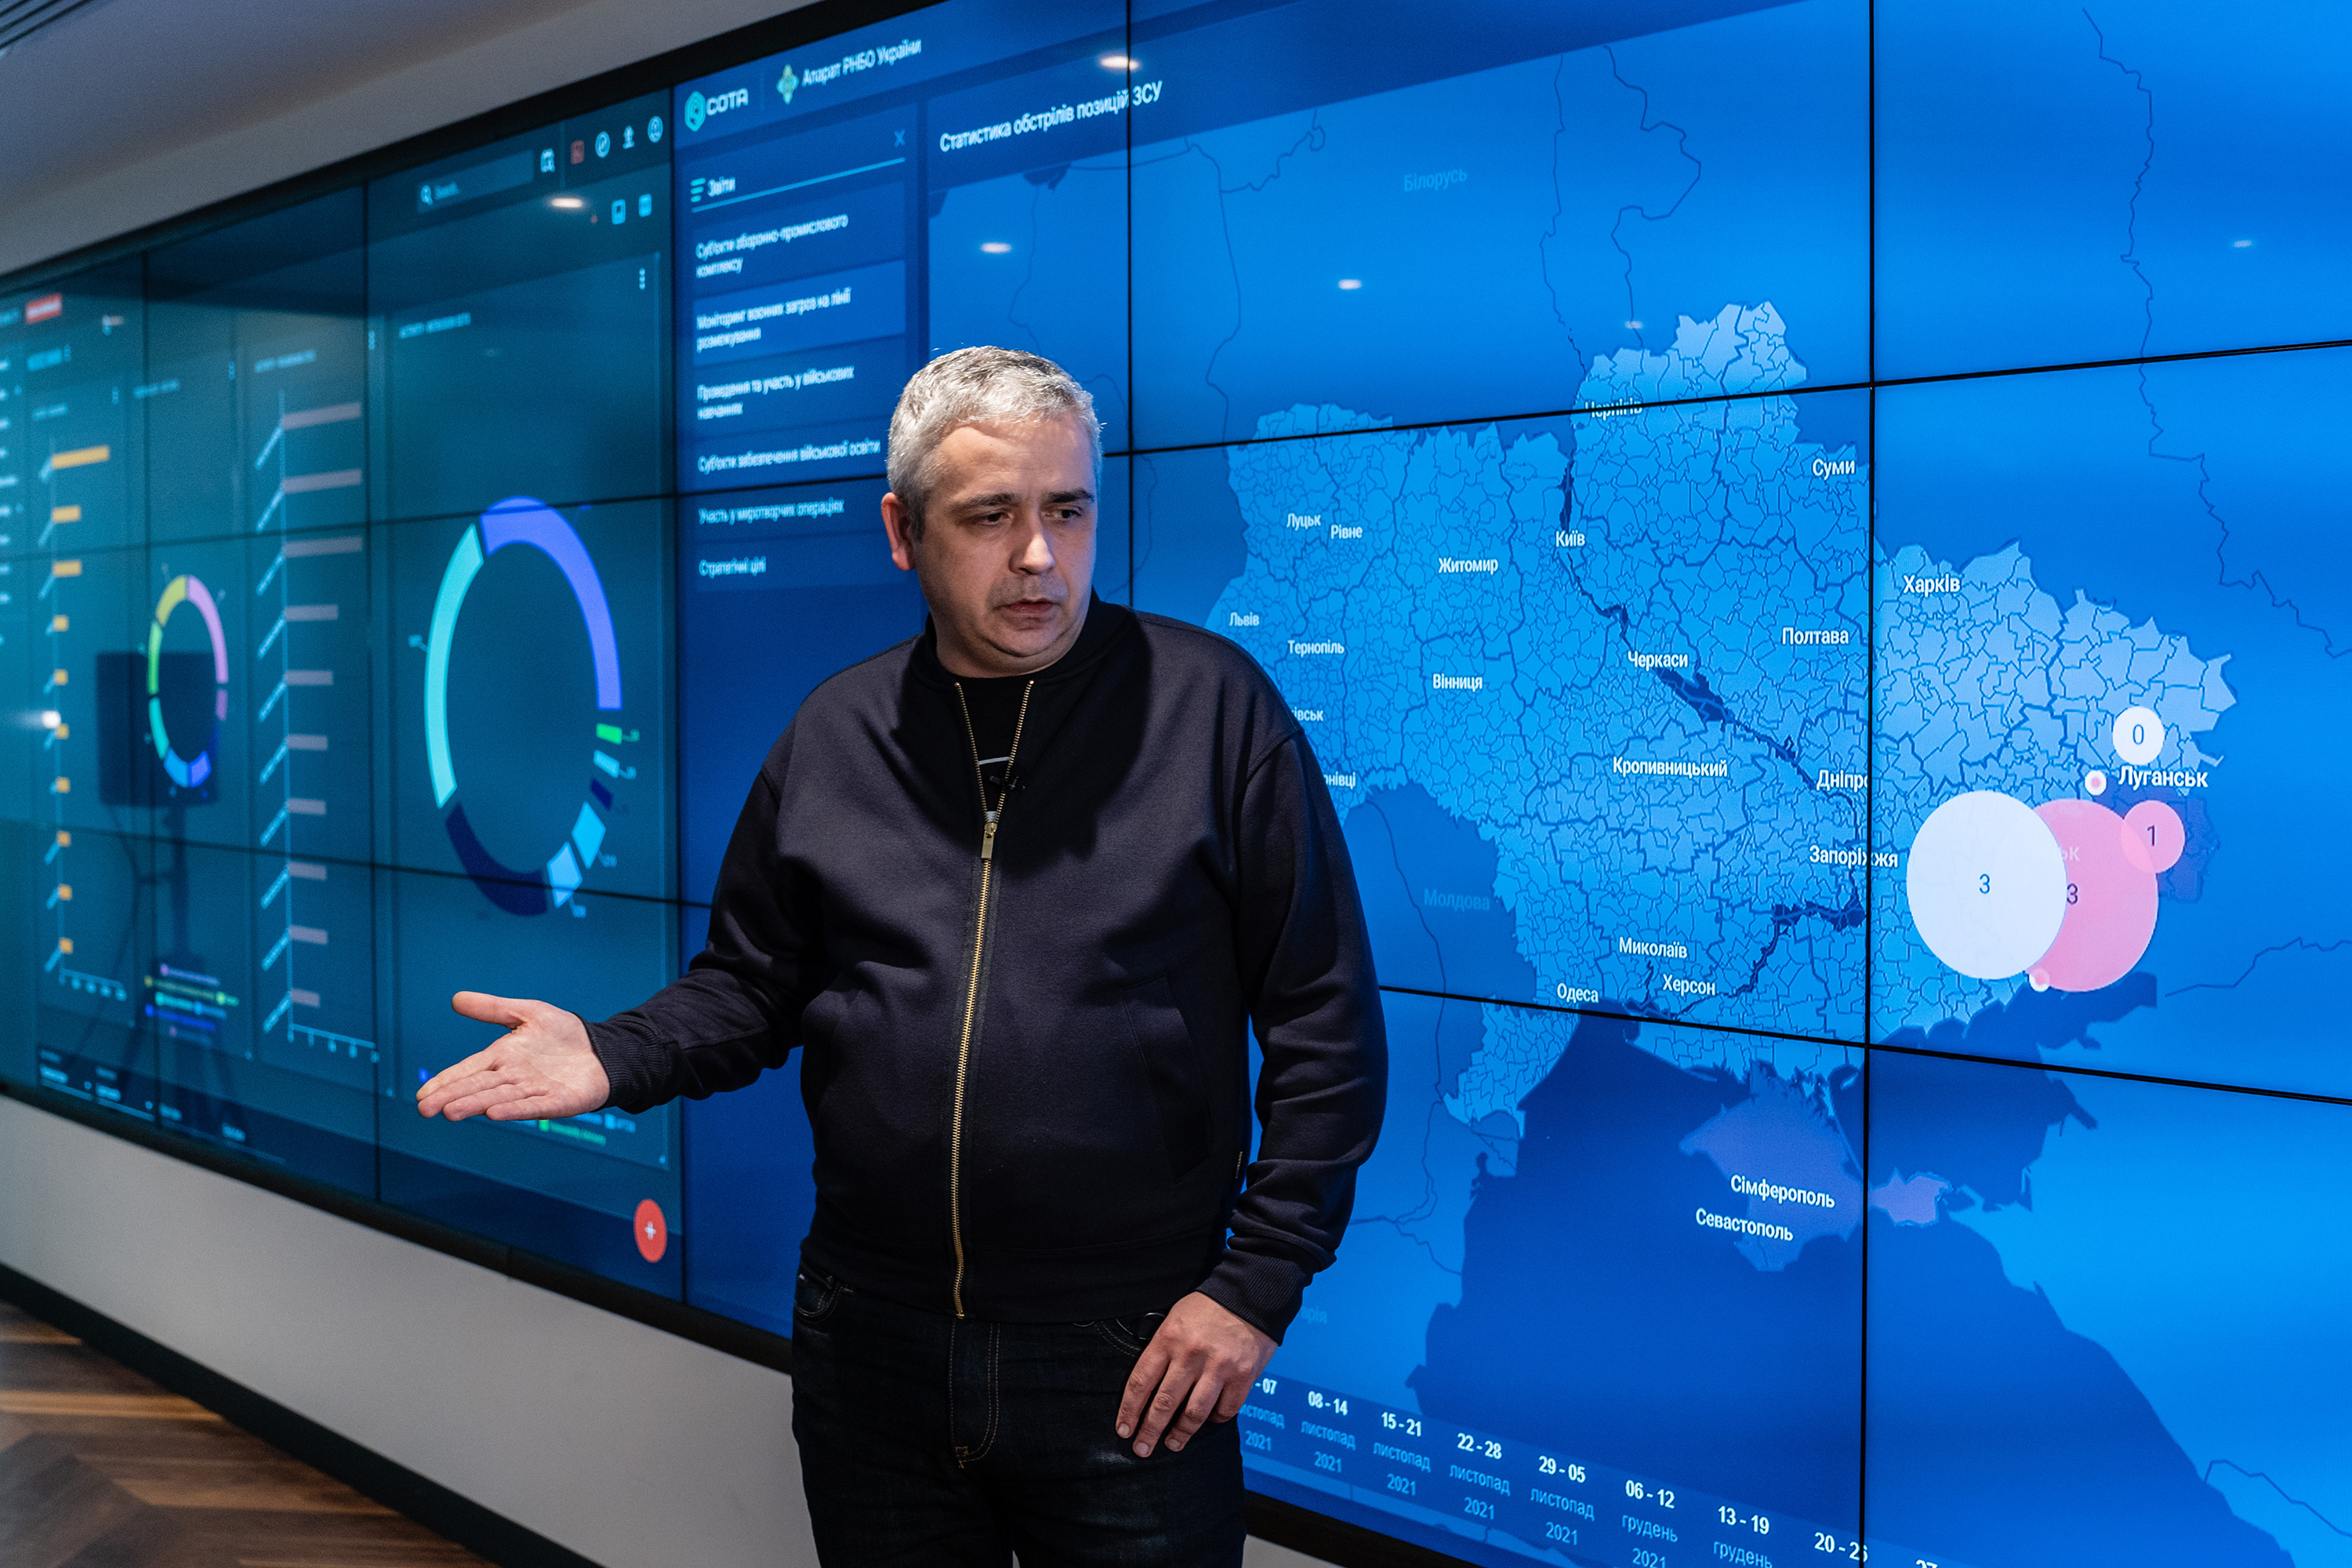 Serhii Prokopenko, head of the National Cybersecurity Coordination Center, discusses recent events in Kyiv, Ukraine on Thursday, February 17, 2022.